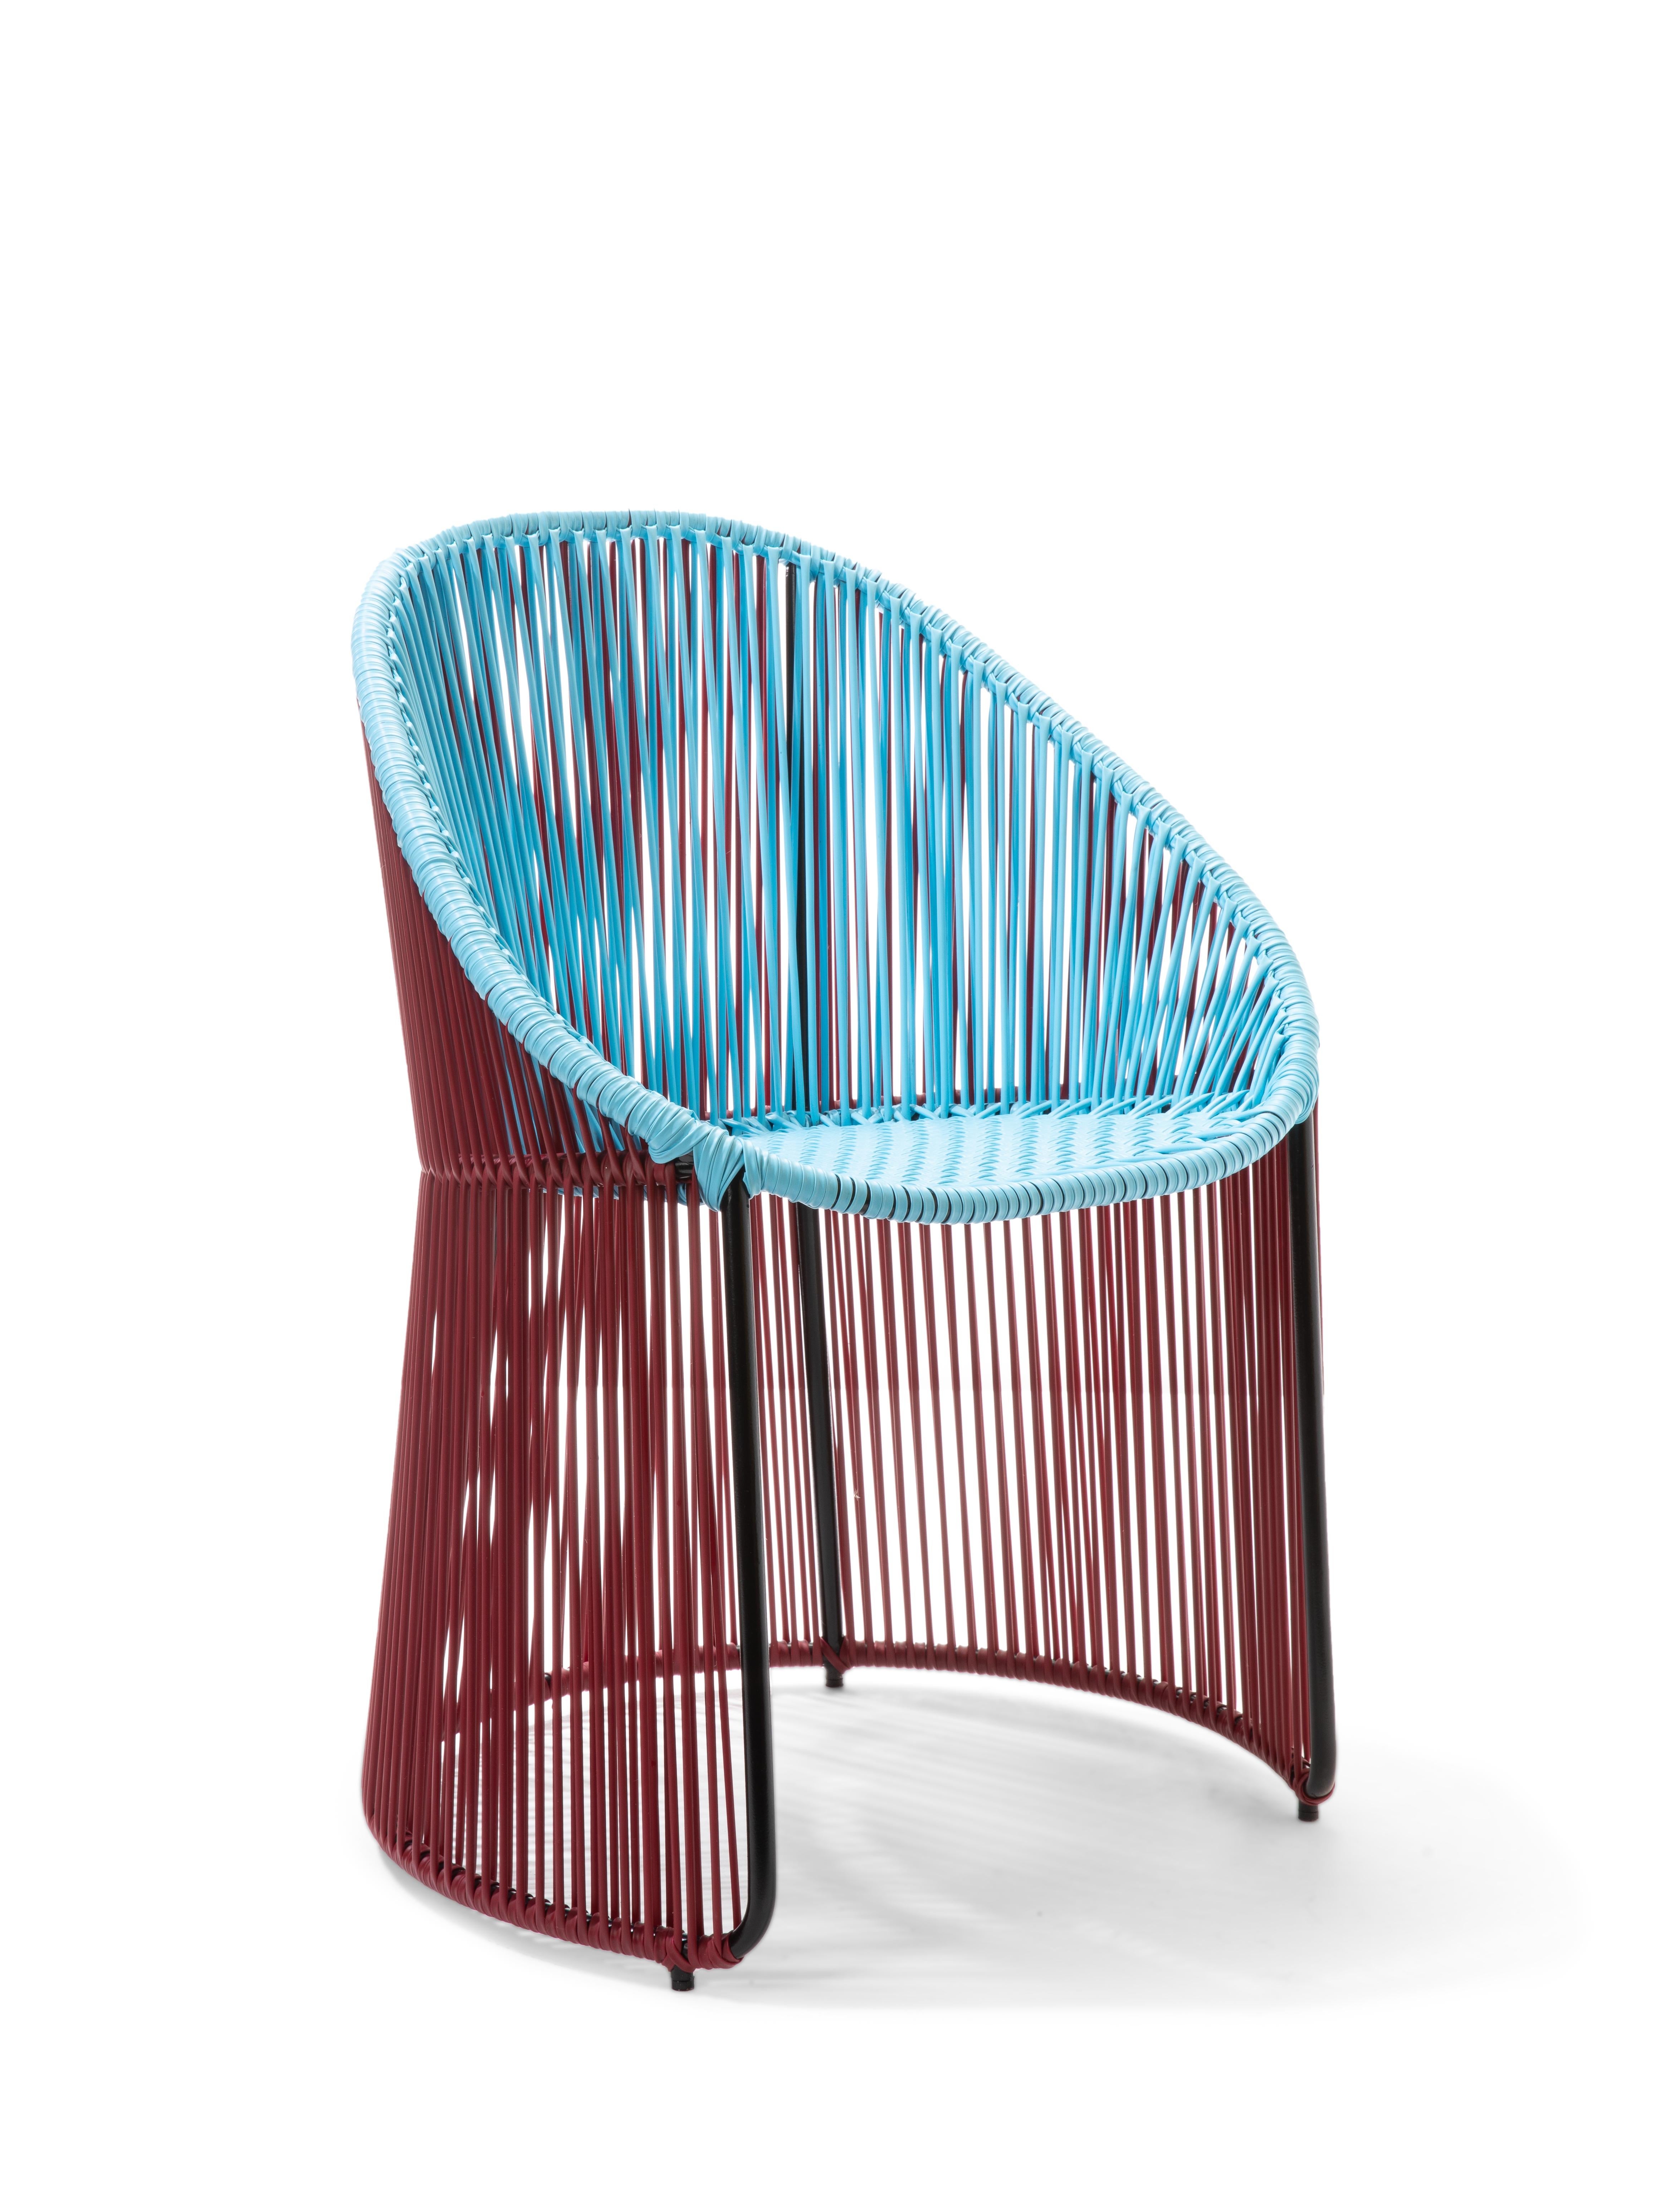 Set of 4 blue pastel/purple cartagenas dining chair by Sebastian Herkner.
Materials: PVC strings. Galvanized and powder-coated tubular steel frame.
Technique: made from recycled plastic. Weaved by local craftspeople in Colombia. 
Dimensions: W